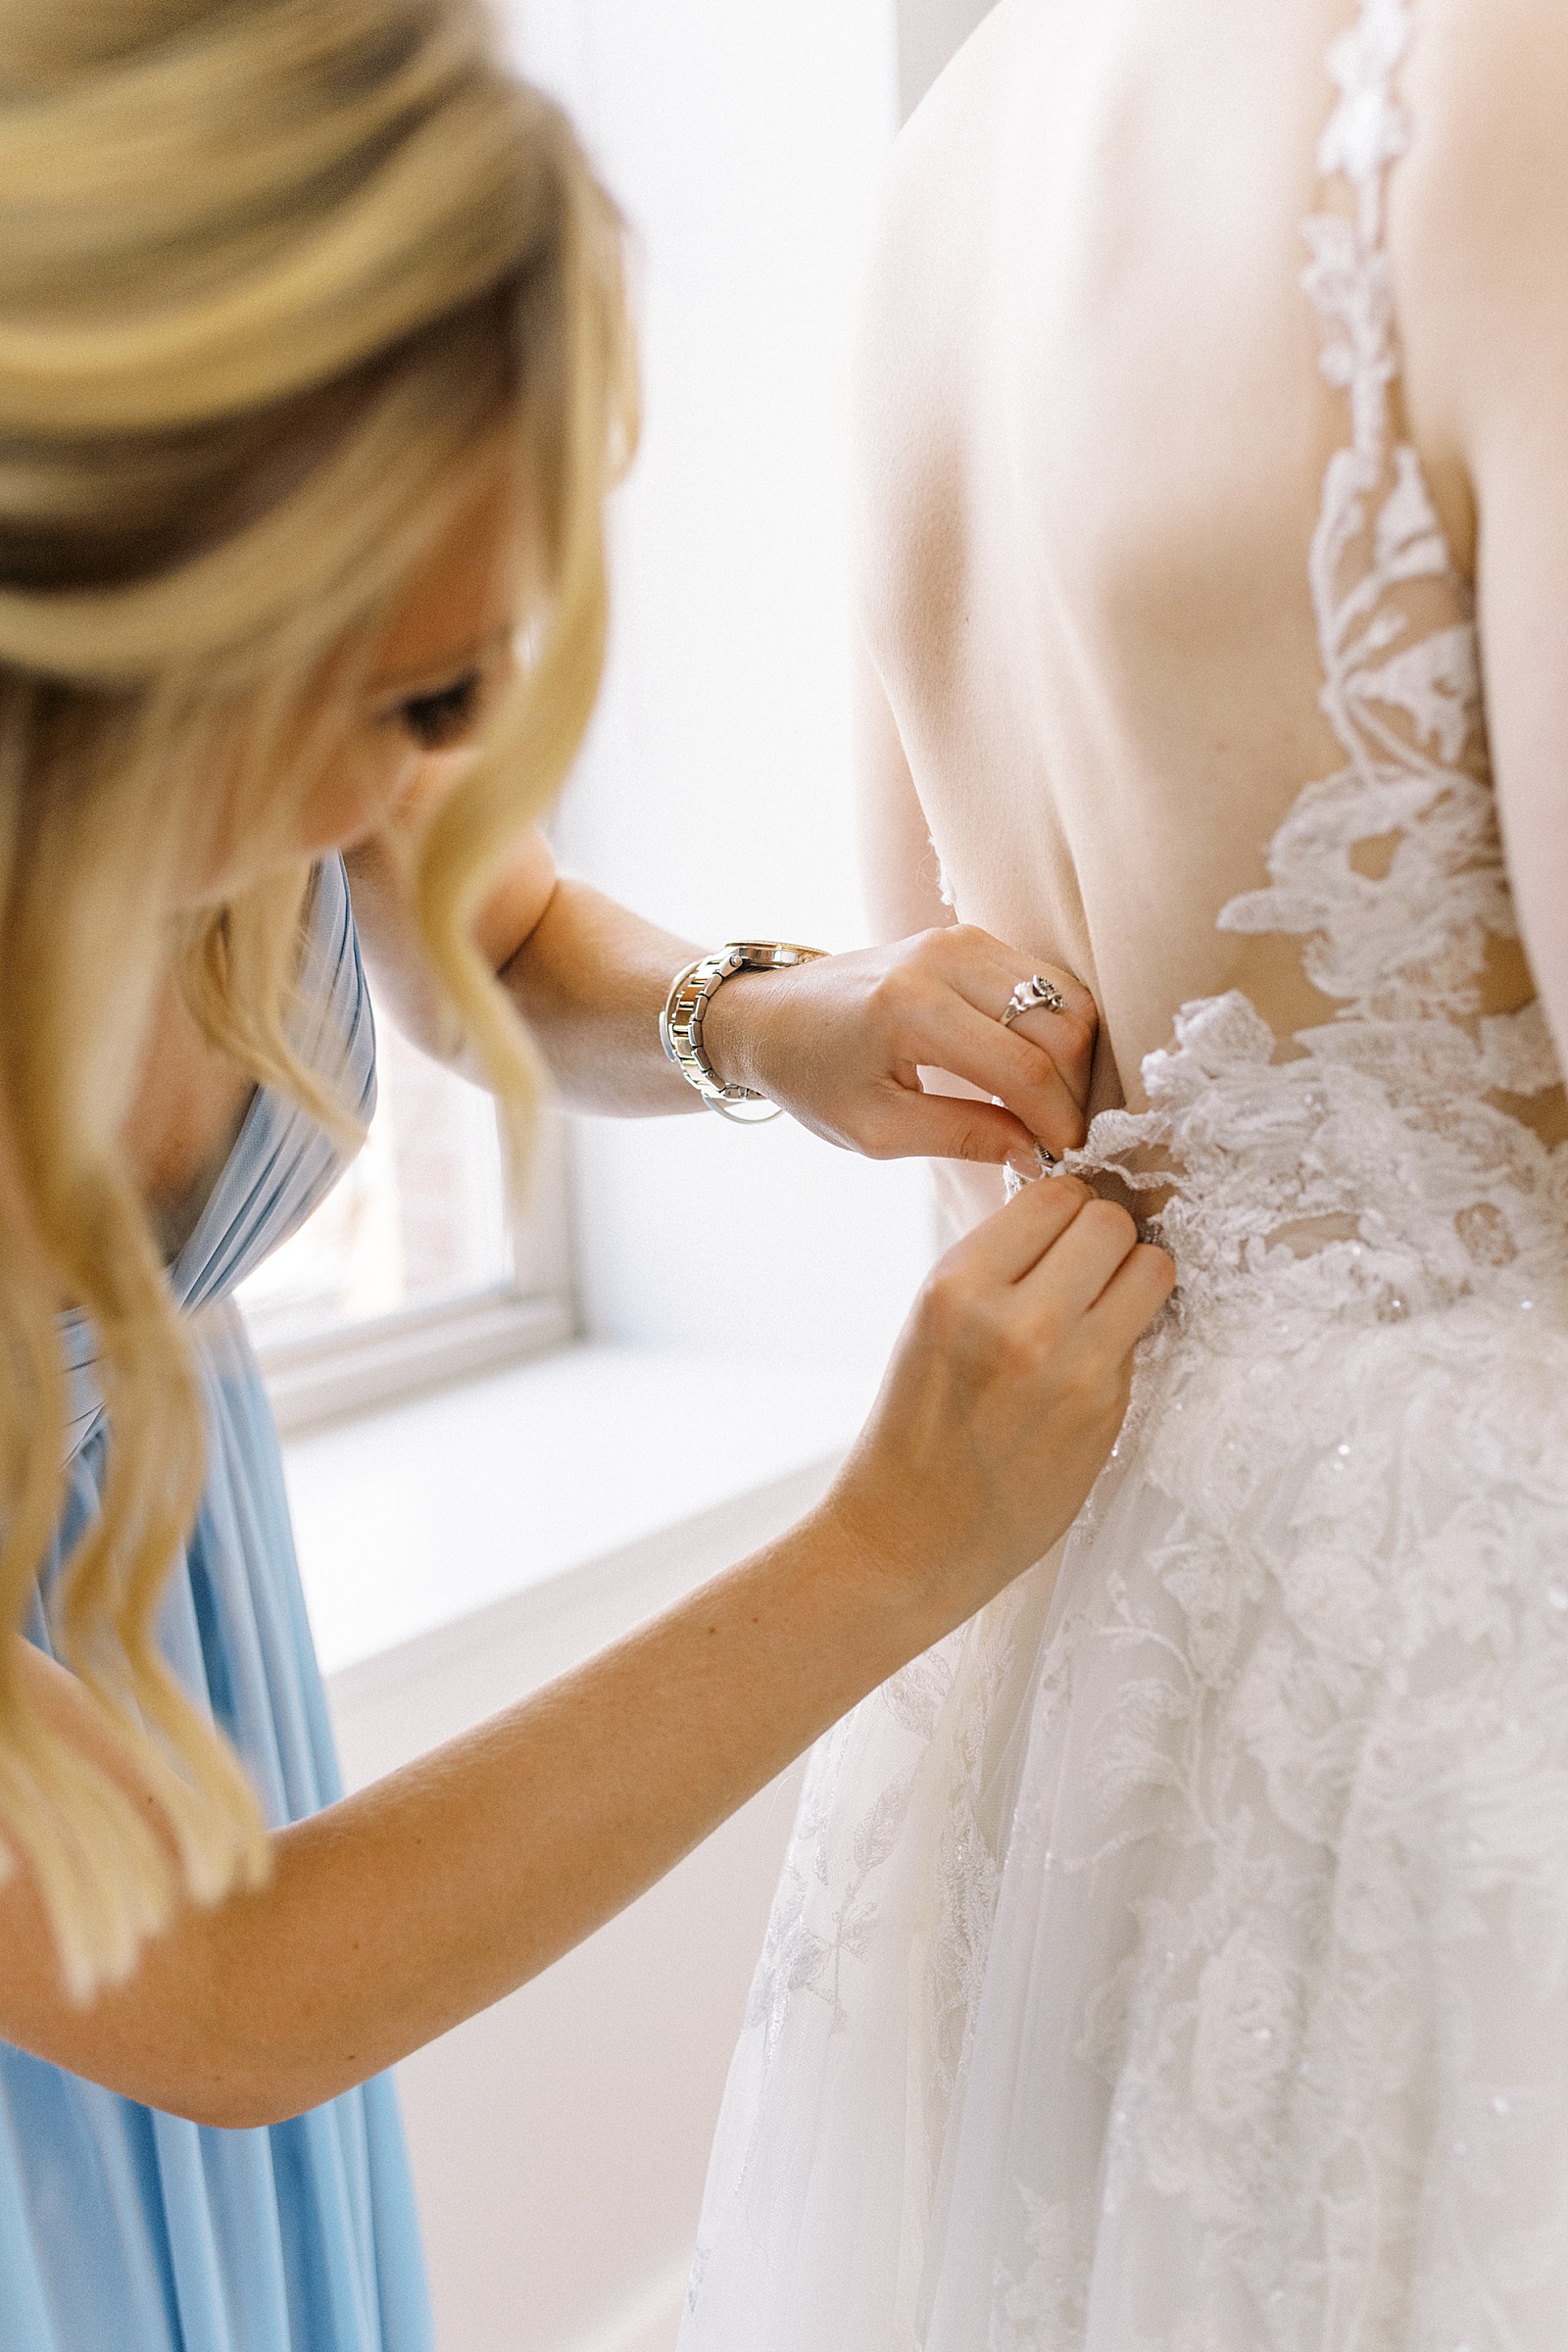 Wedding dress being zipped up at this Boston wedding by photographer Lynne Reznick. 